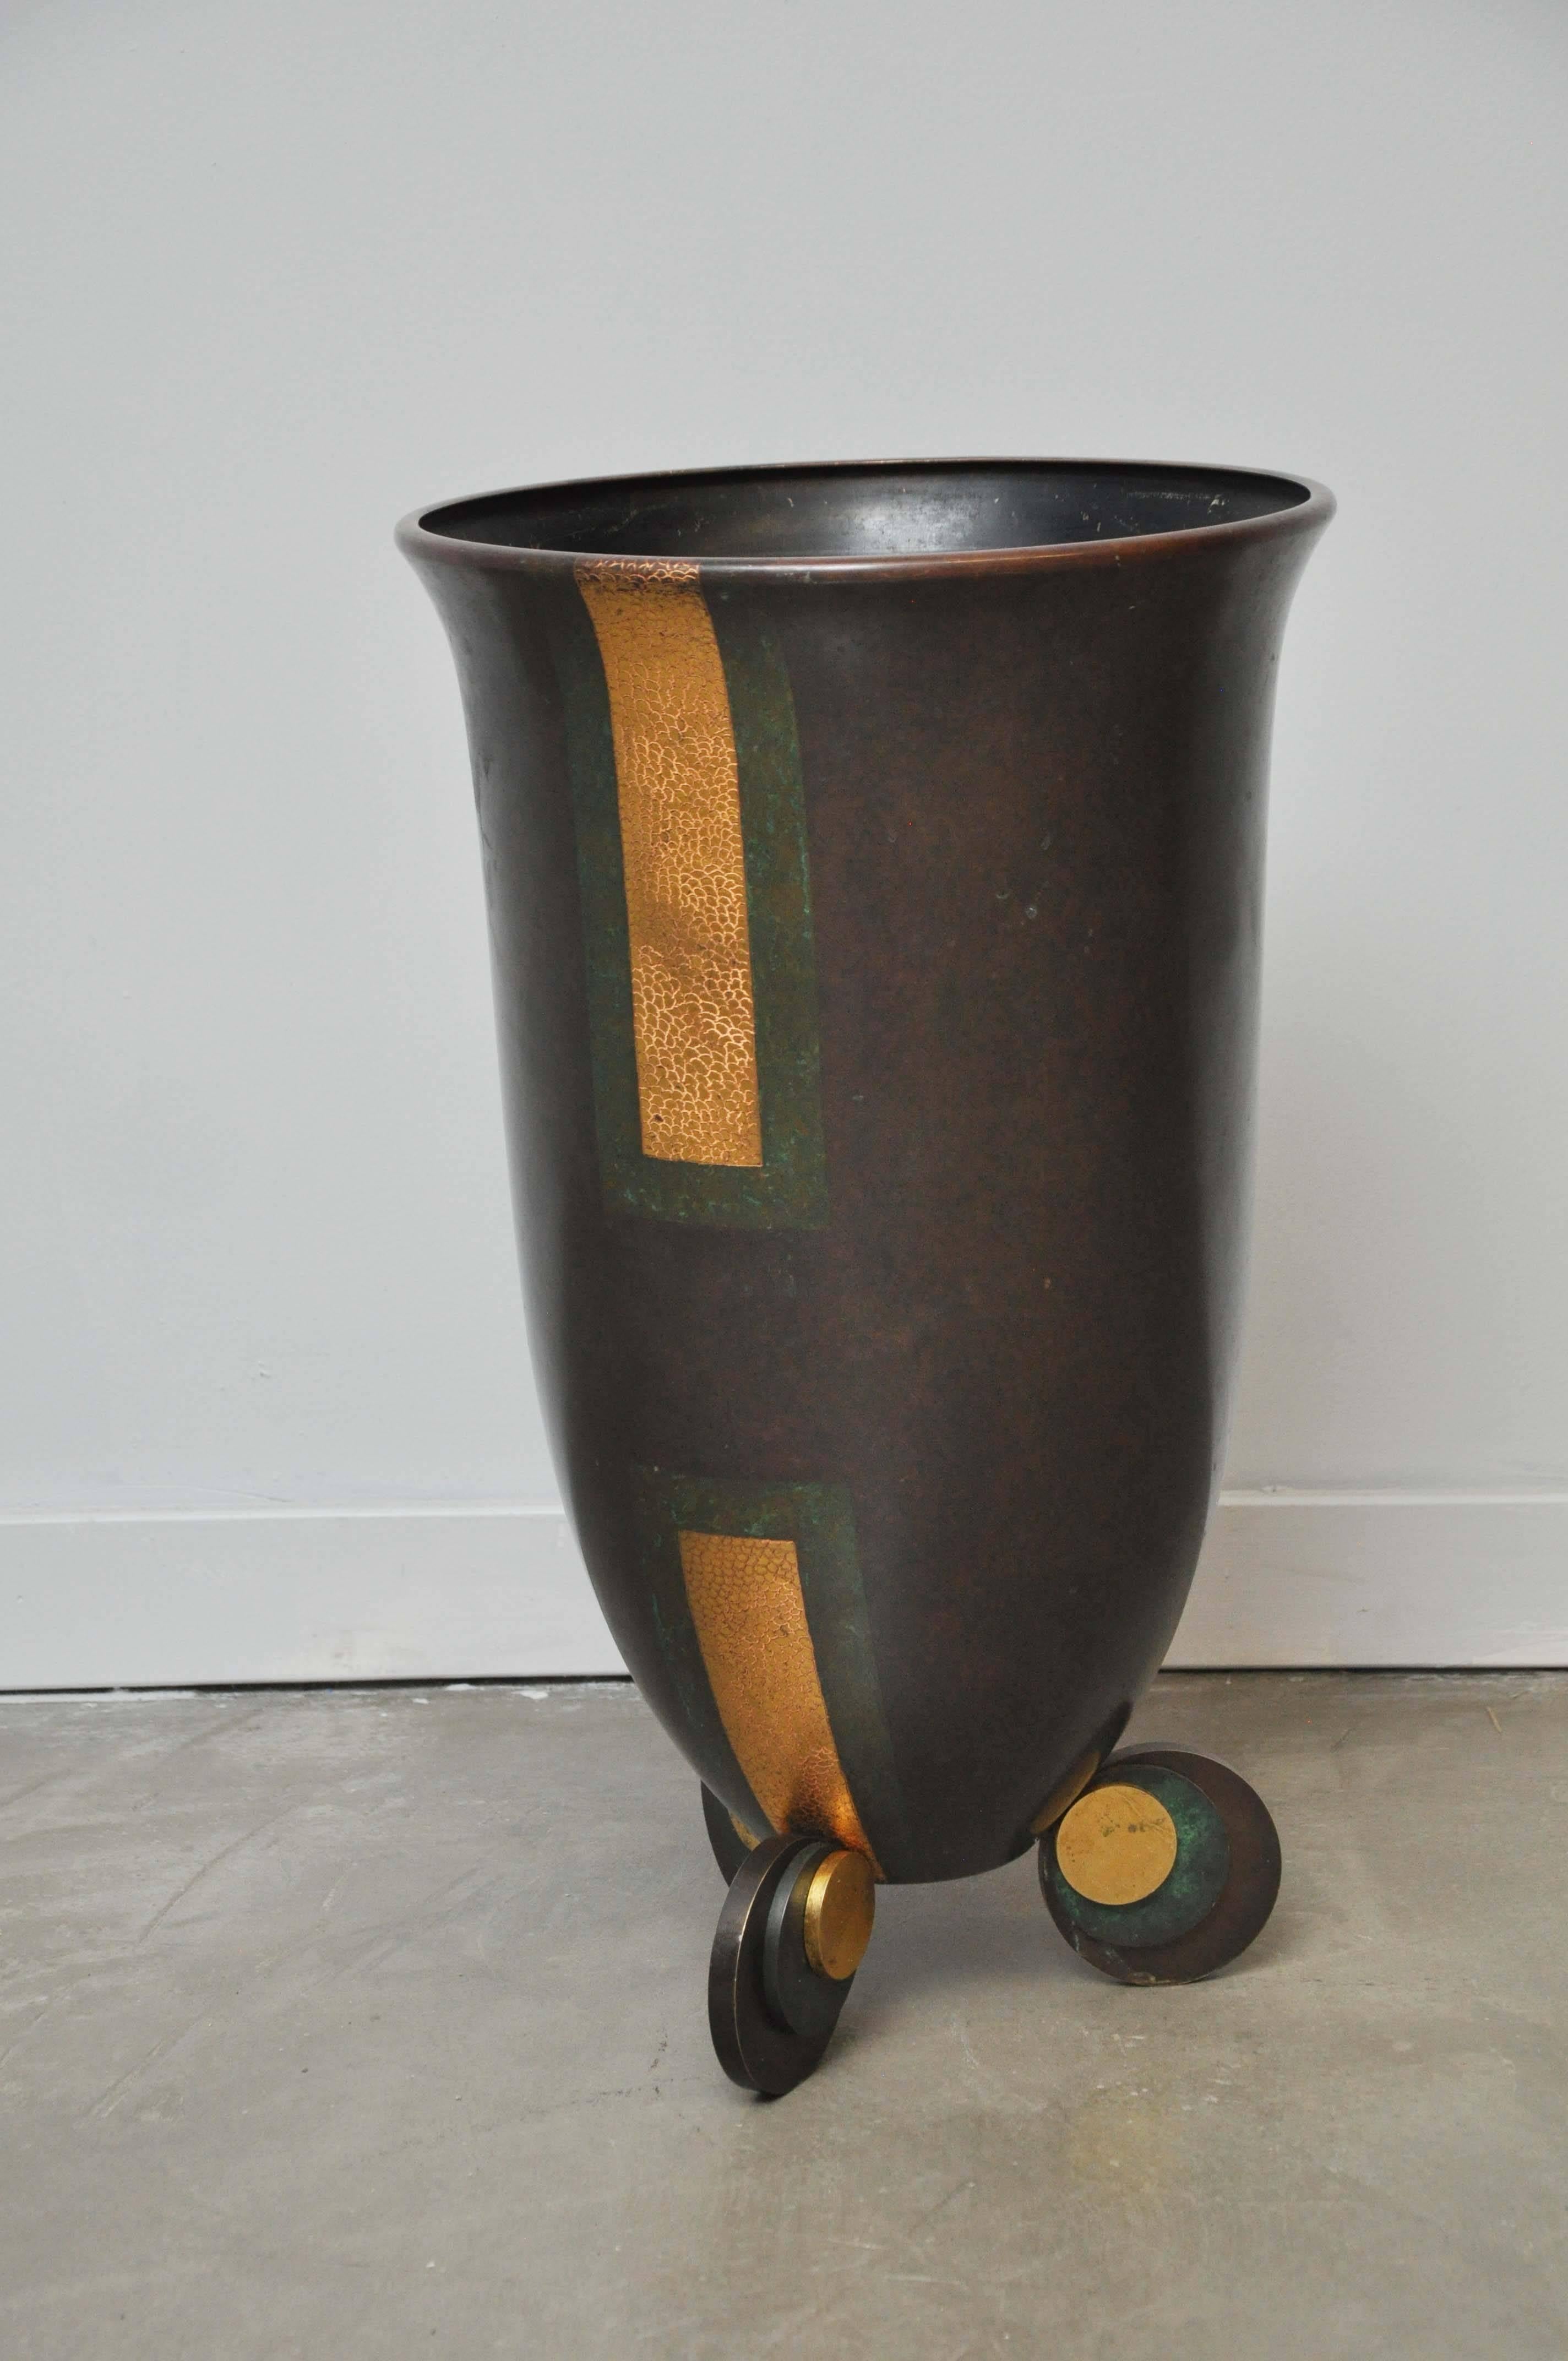 Bronze urn by Karl Springer, circa 1980. Bronze with gilding and applied green patina.

Authentication by Tom Langevin, Director of Karl Springer design, will be included.